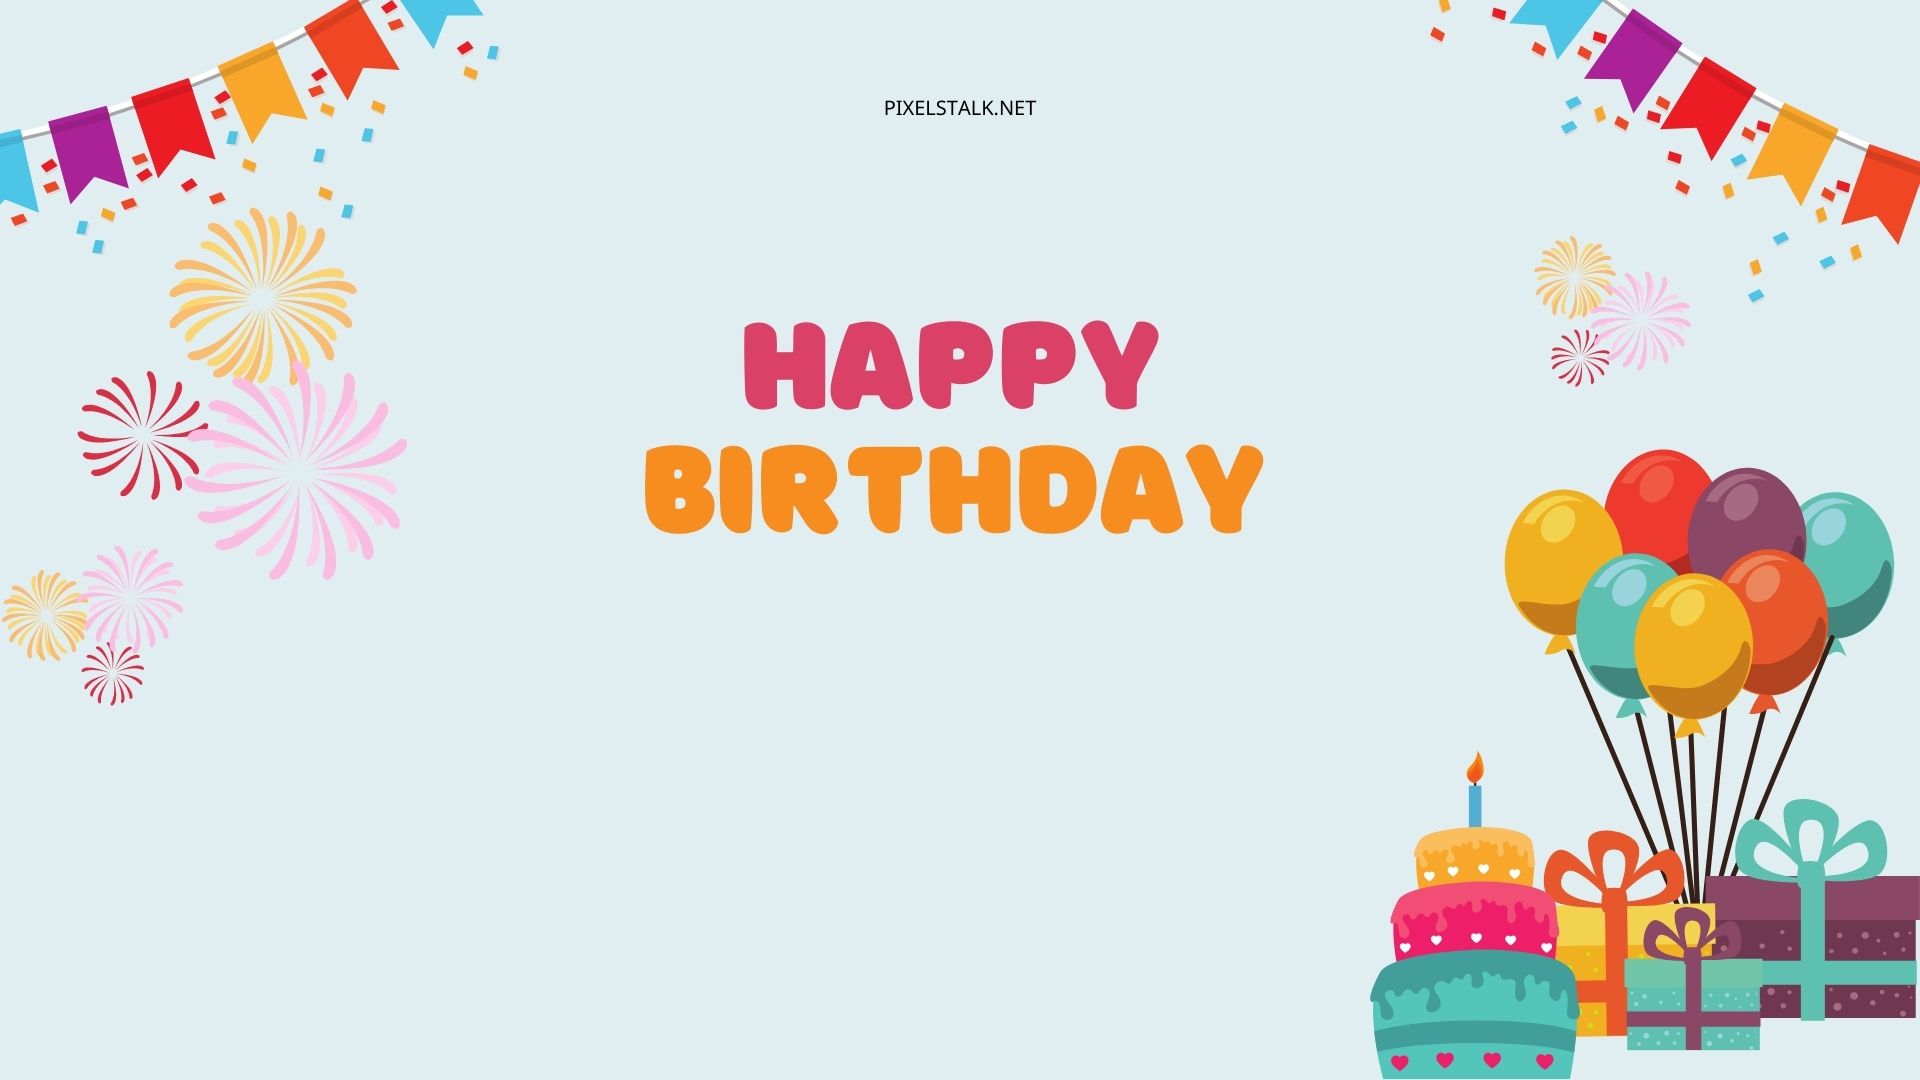 Happy Birthday Wallpapers HD Free 